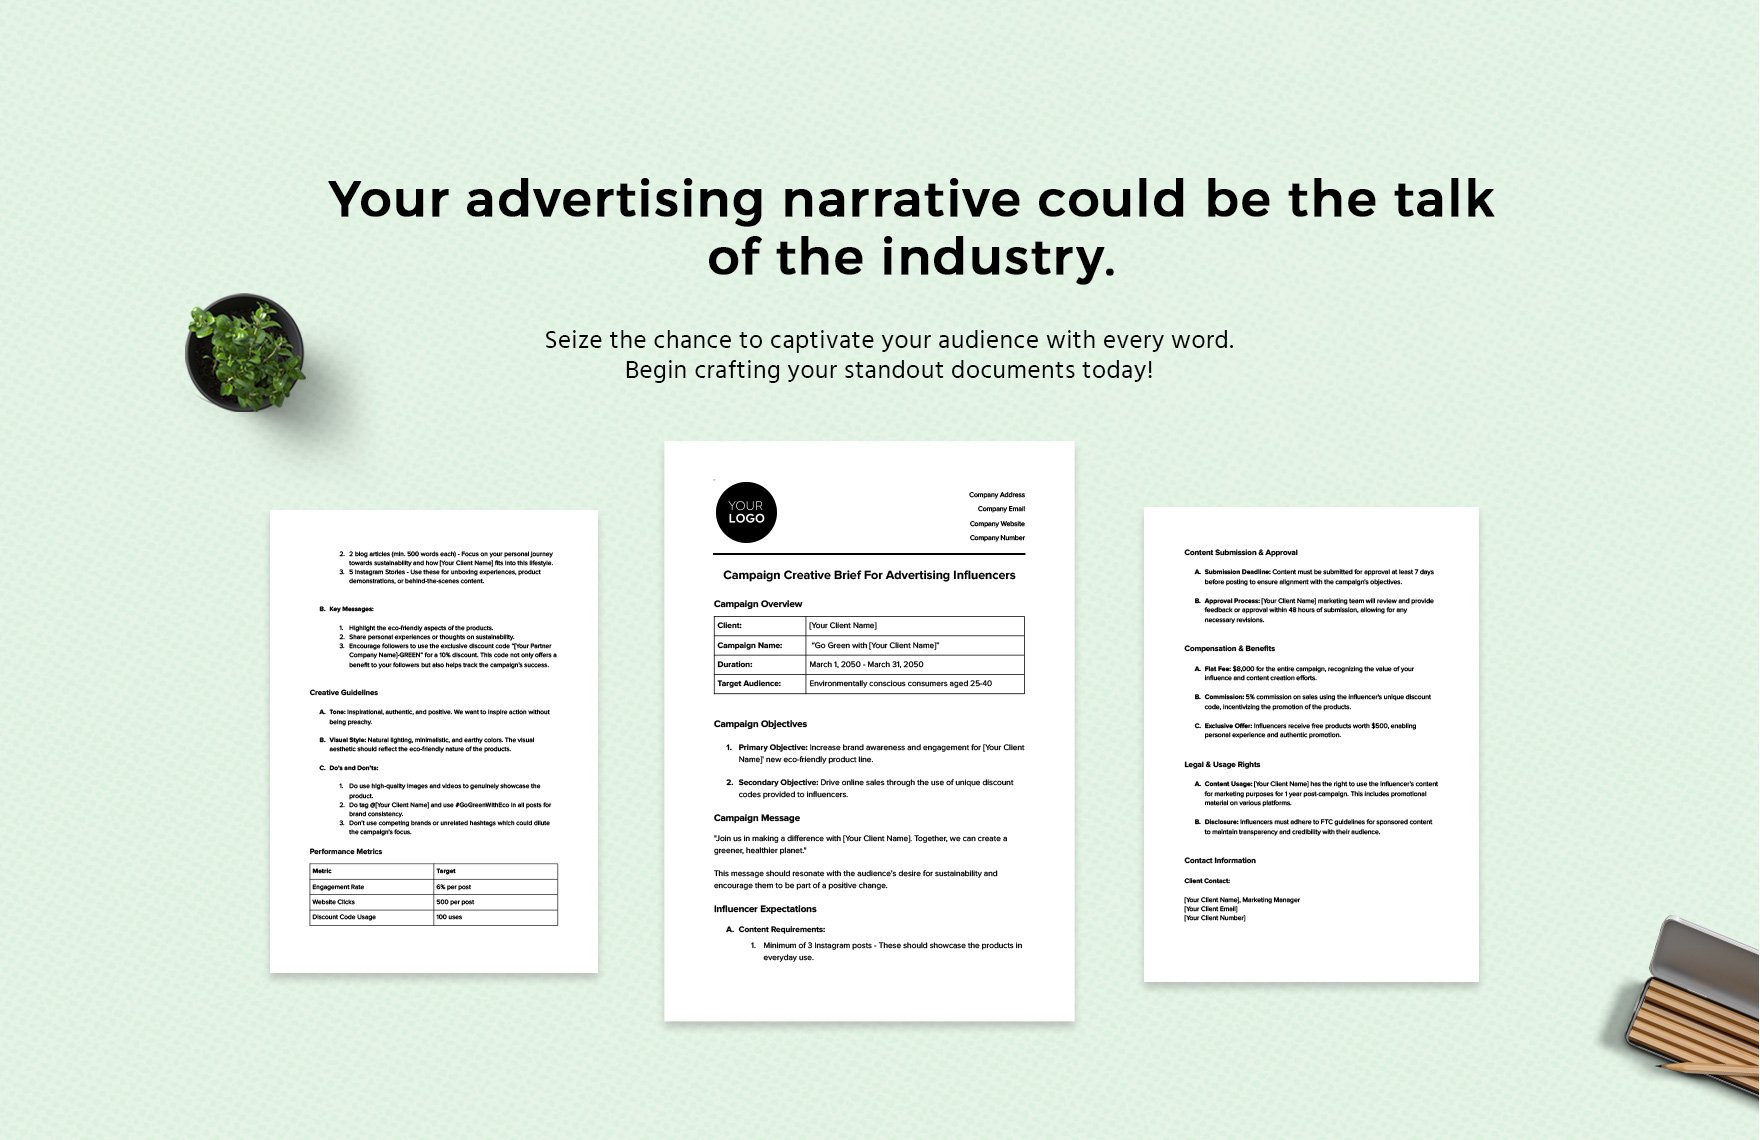 Campaign Creative Brief for Advertising Influencers Template